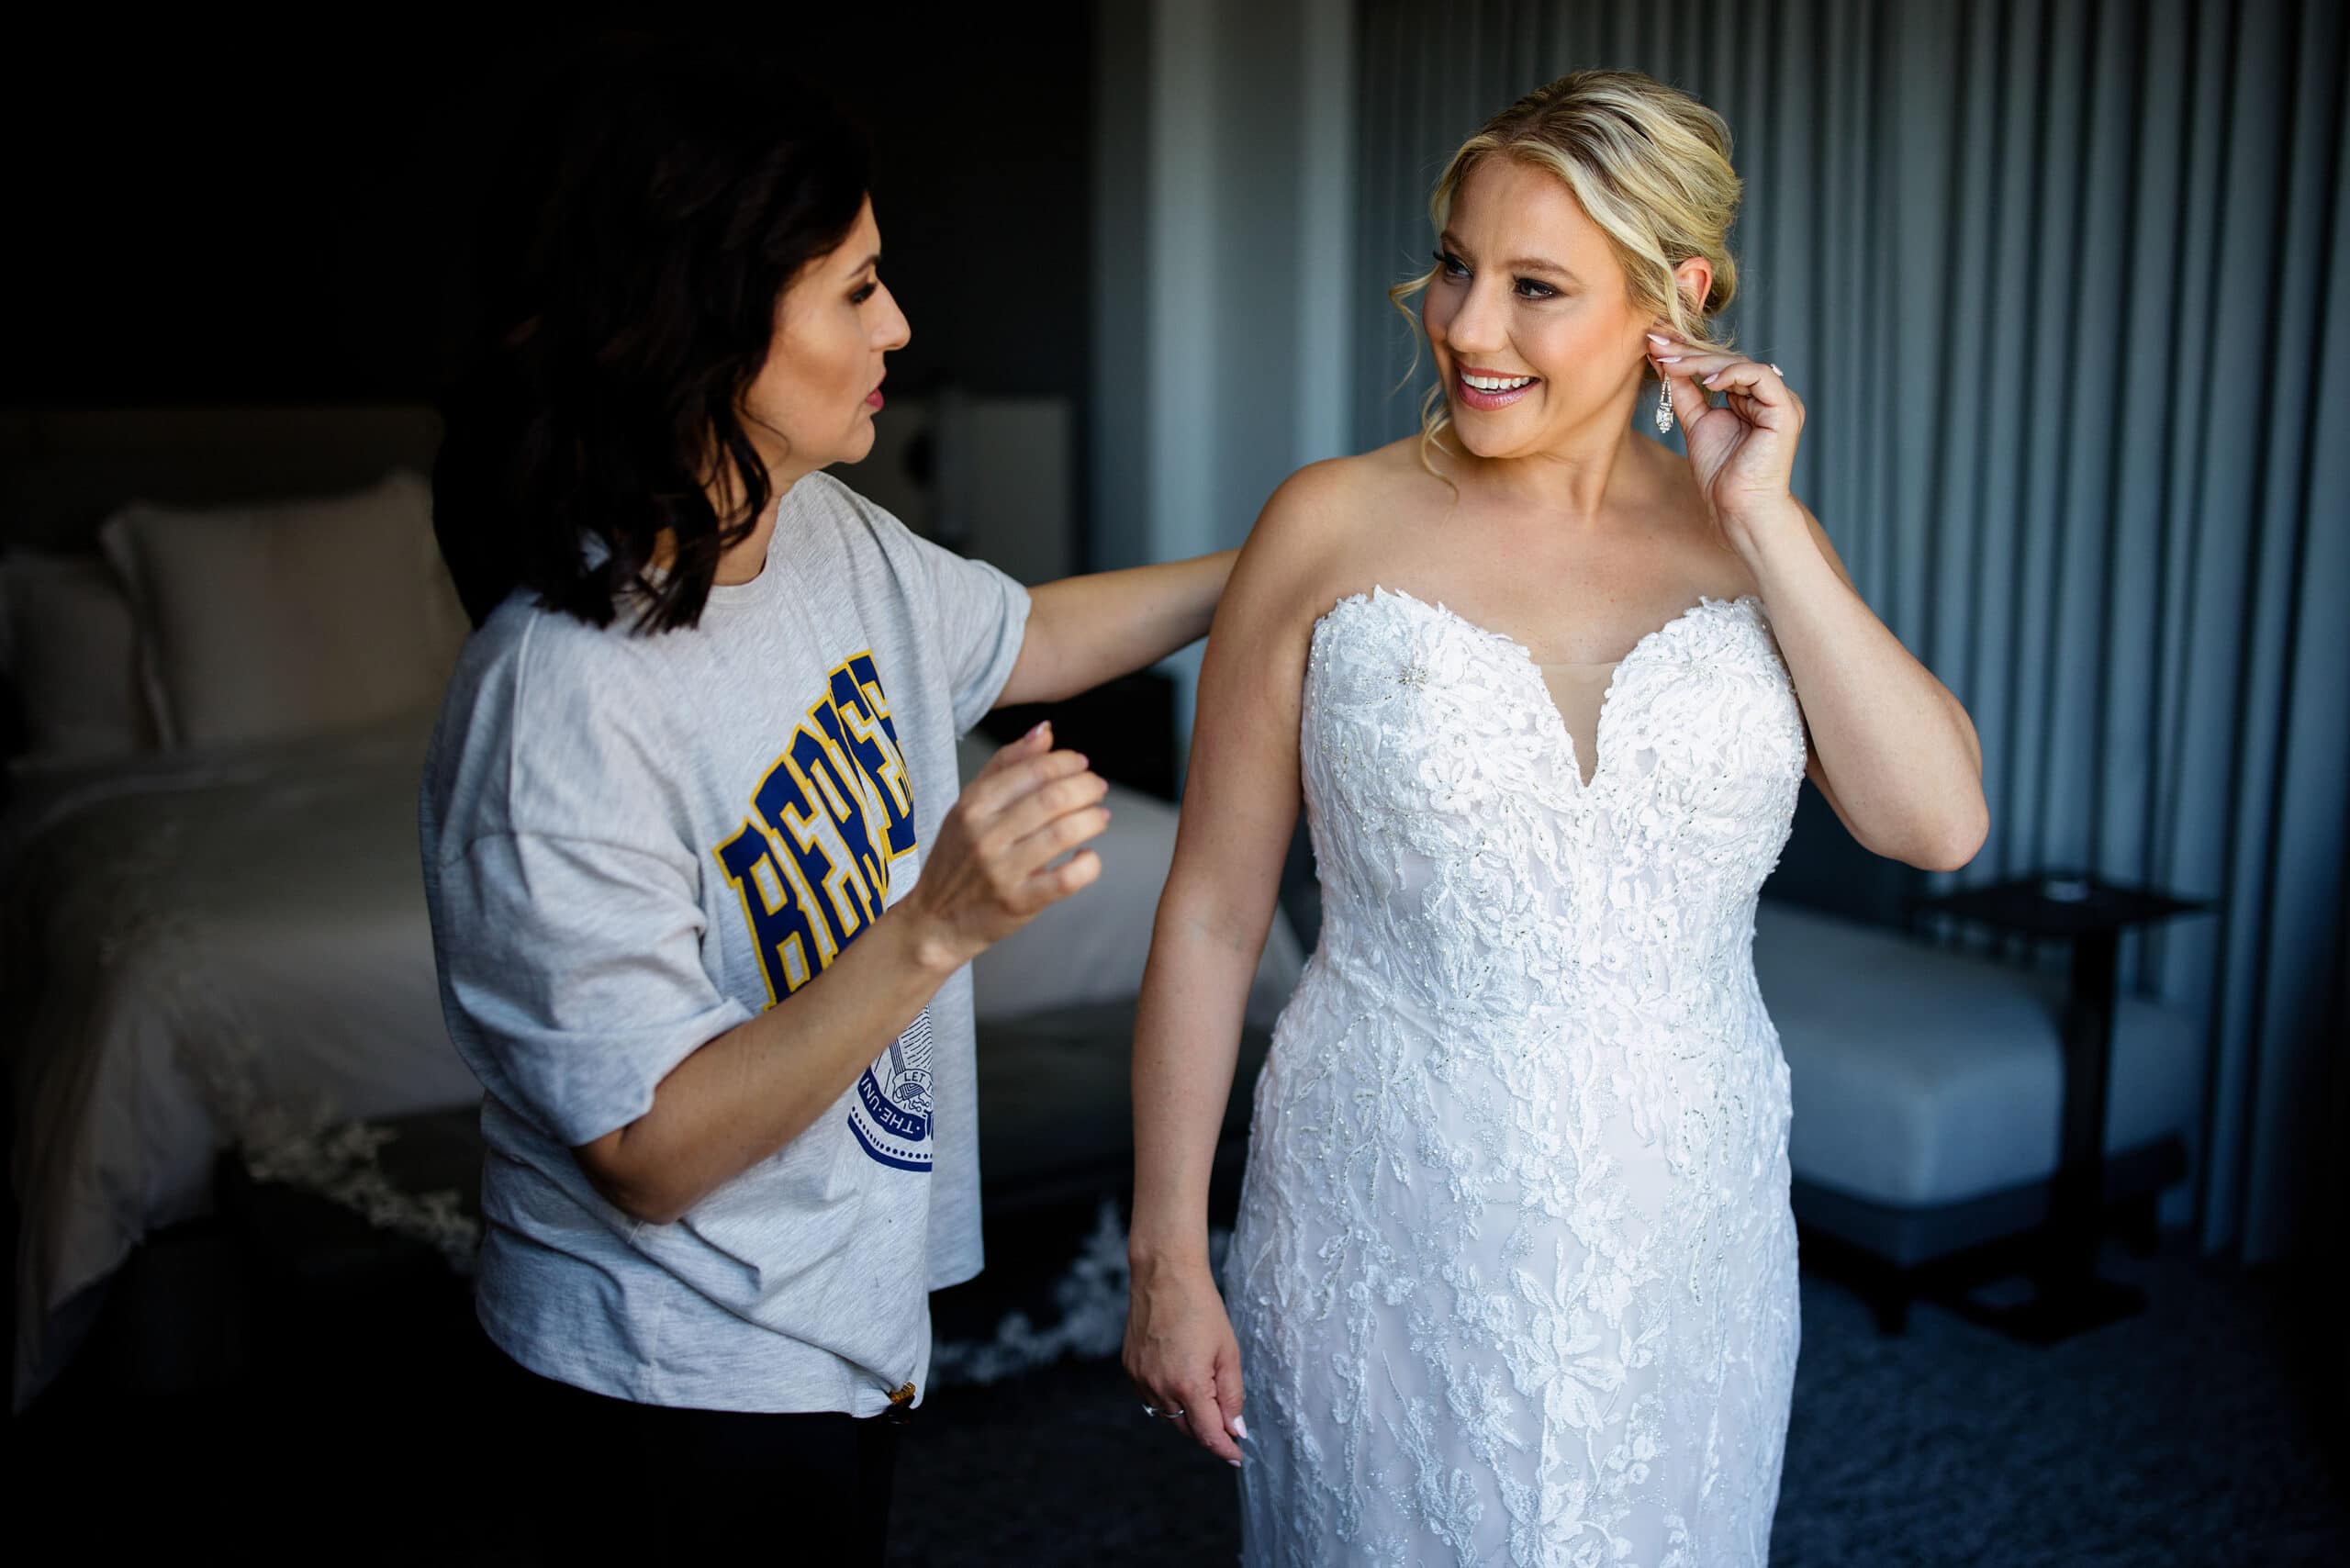 The bride puts on an earring as a family member looks on